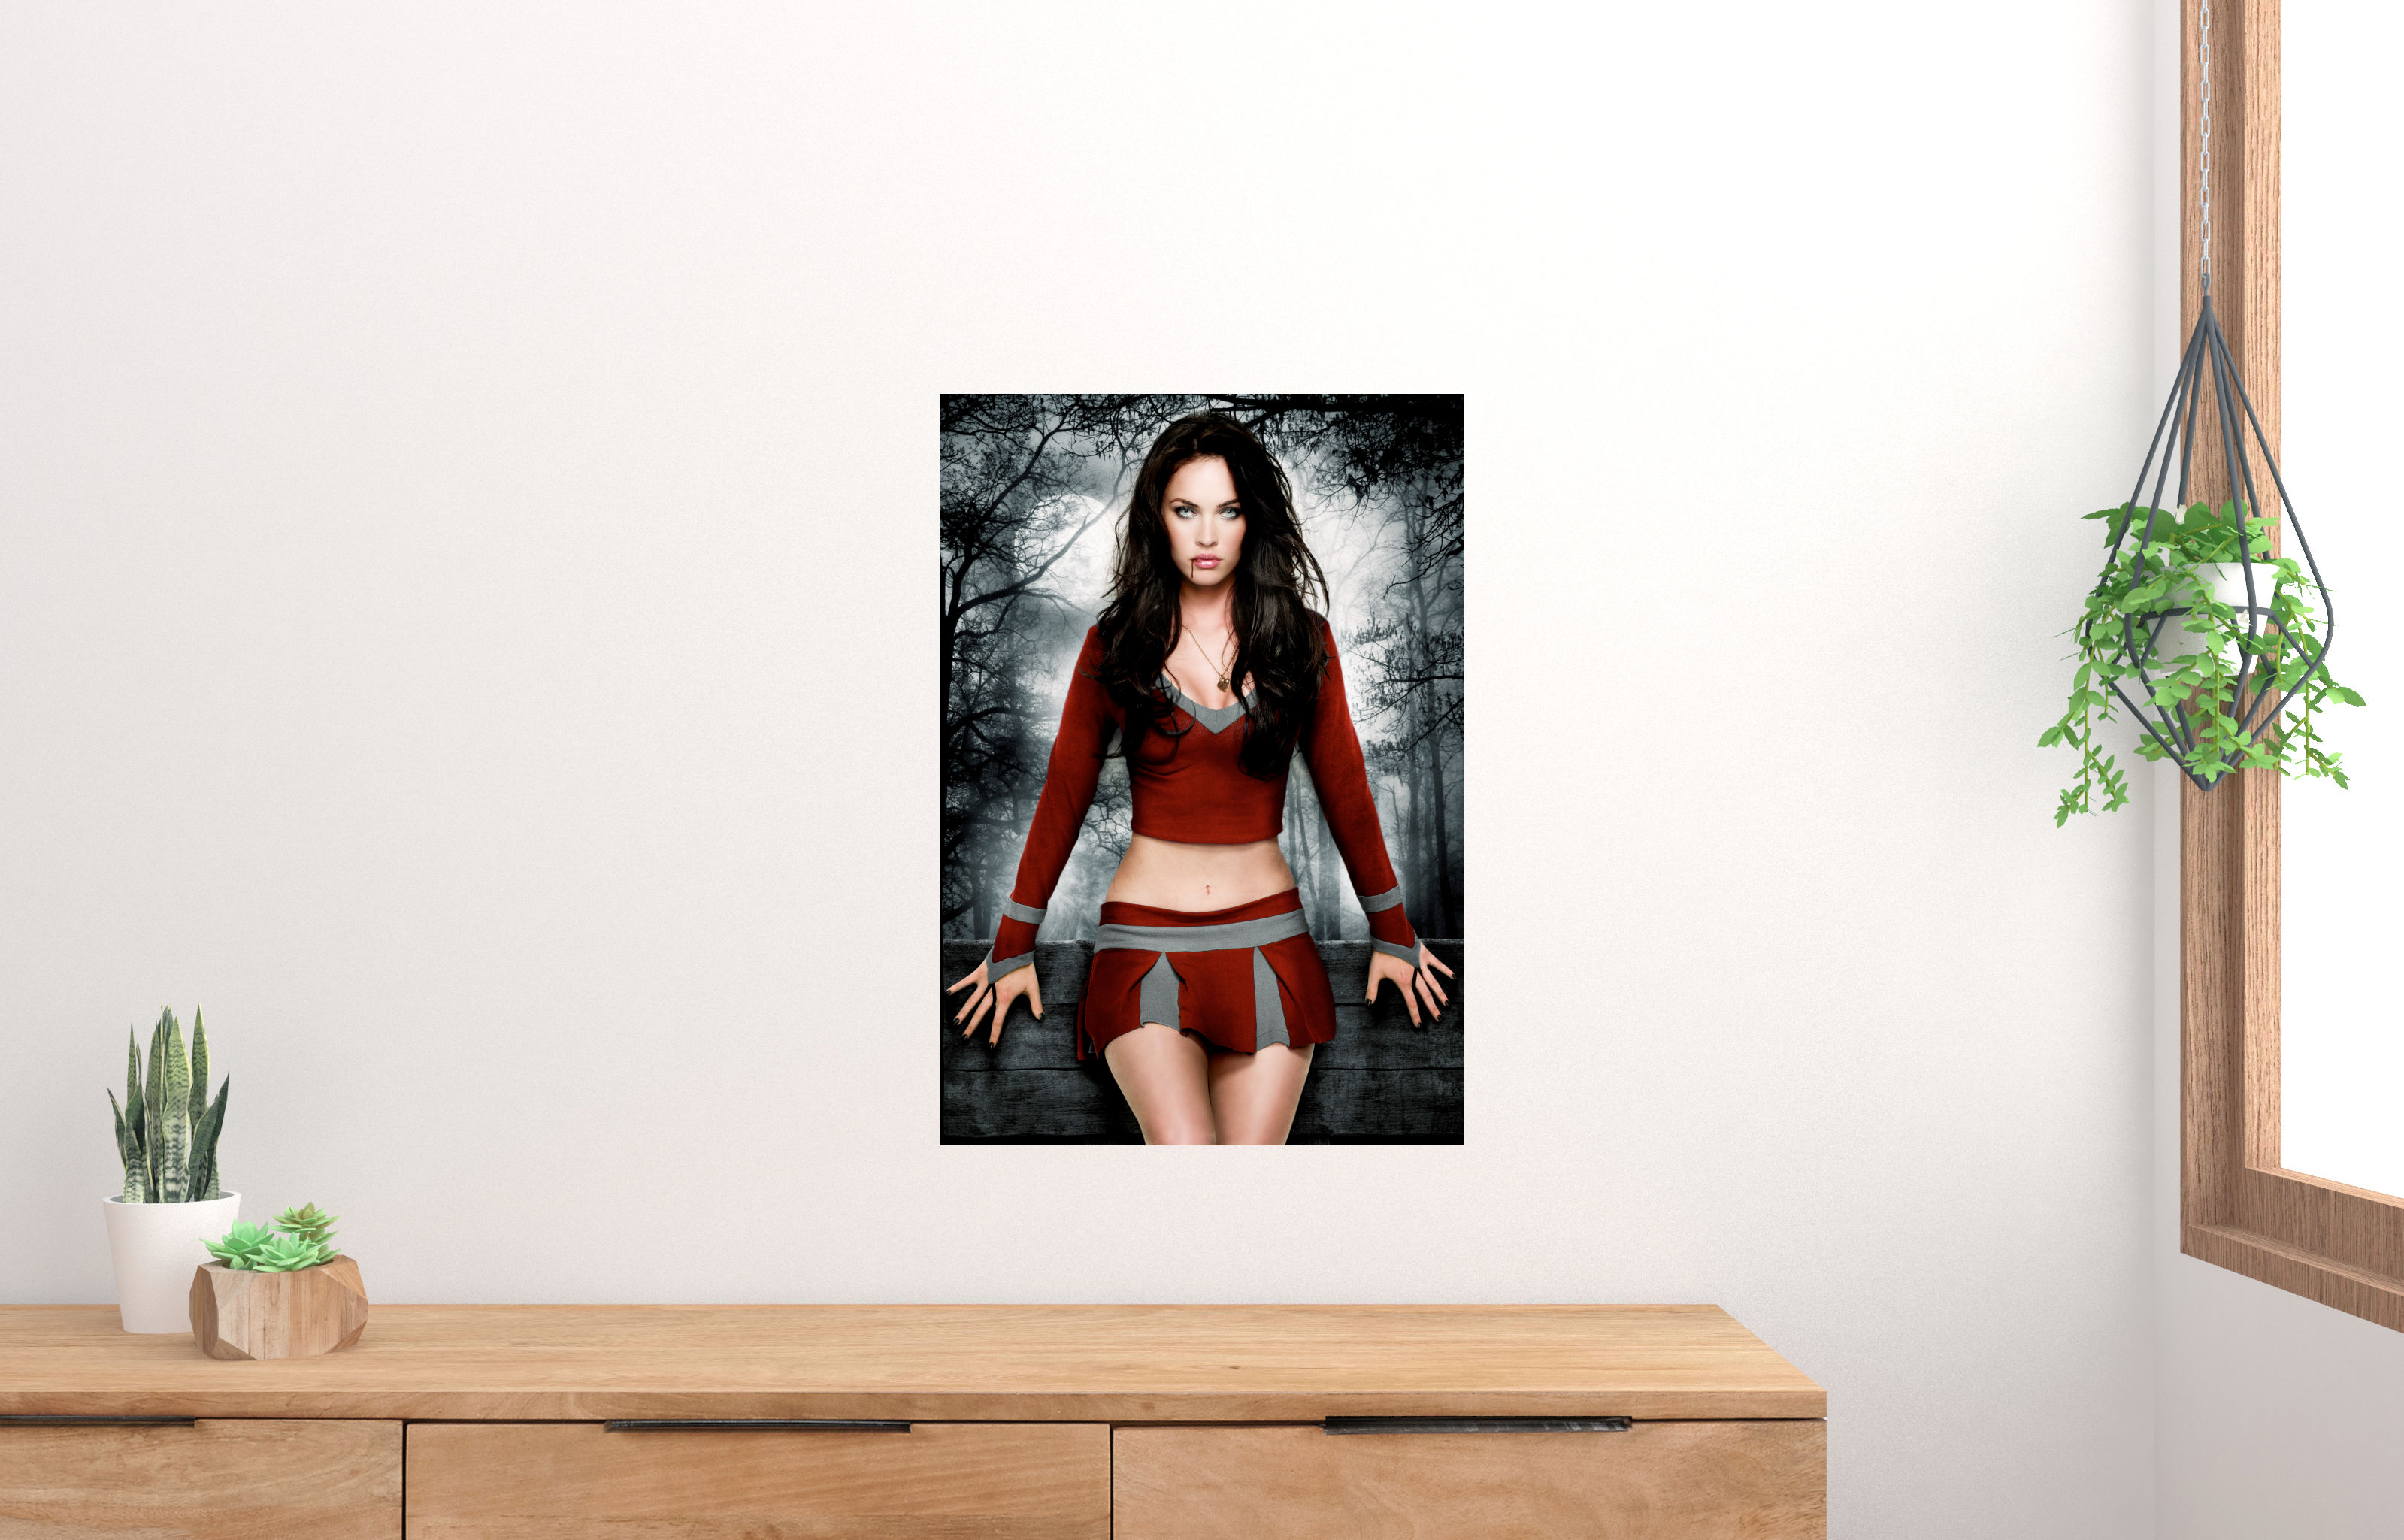 Best posters Jennifers Body Megan Fox Movie poster 16x24 Color Category: Multi, Unframed, Ages: Adults - image 2 of 3